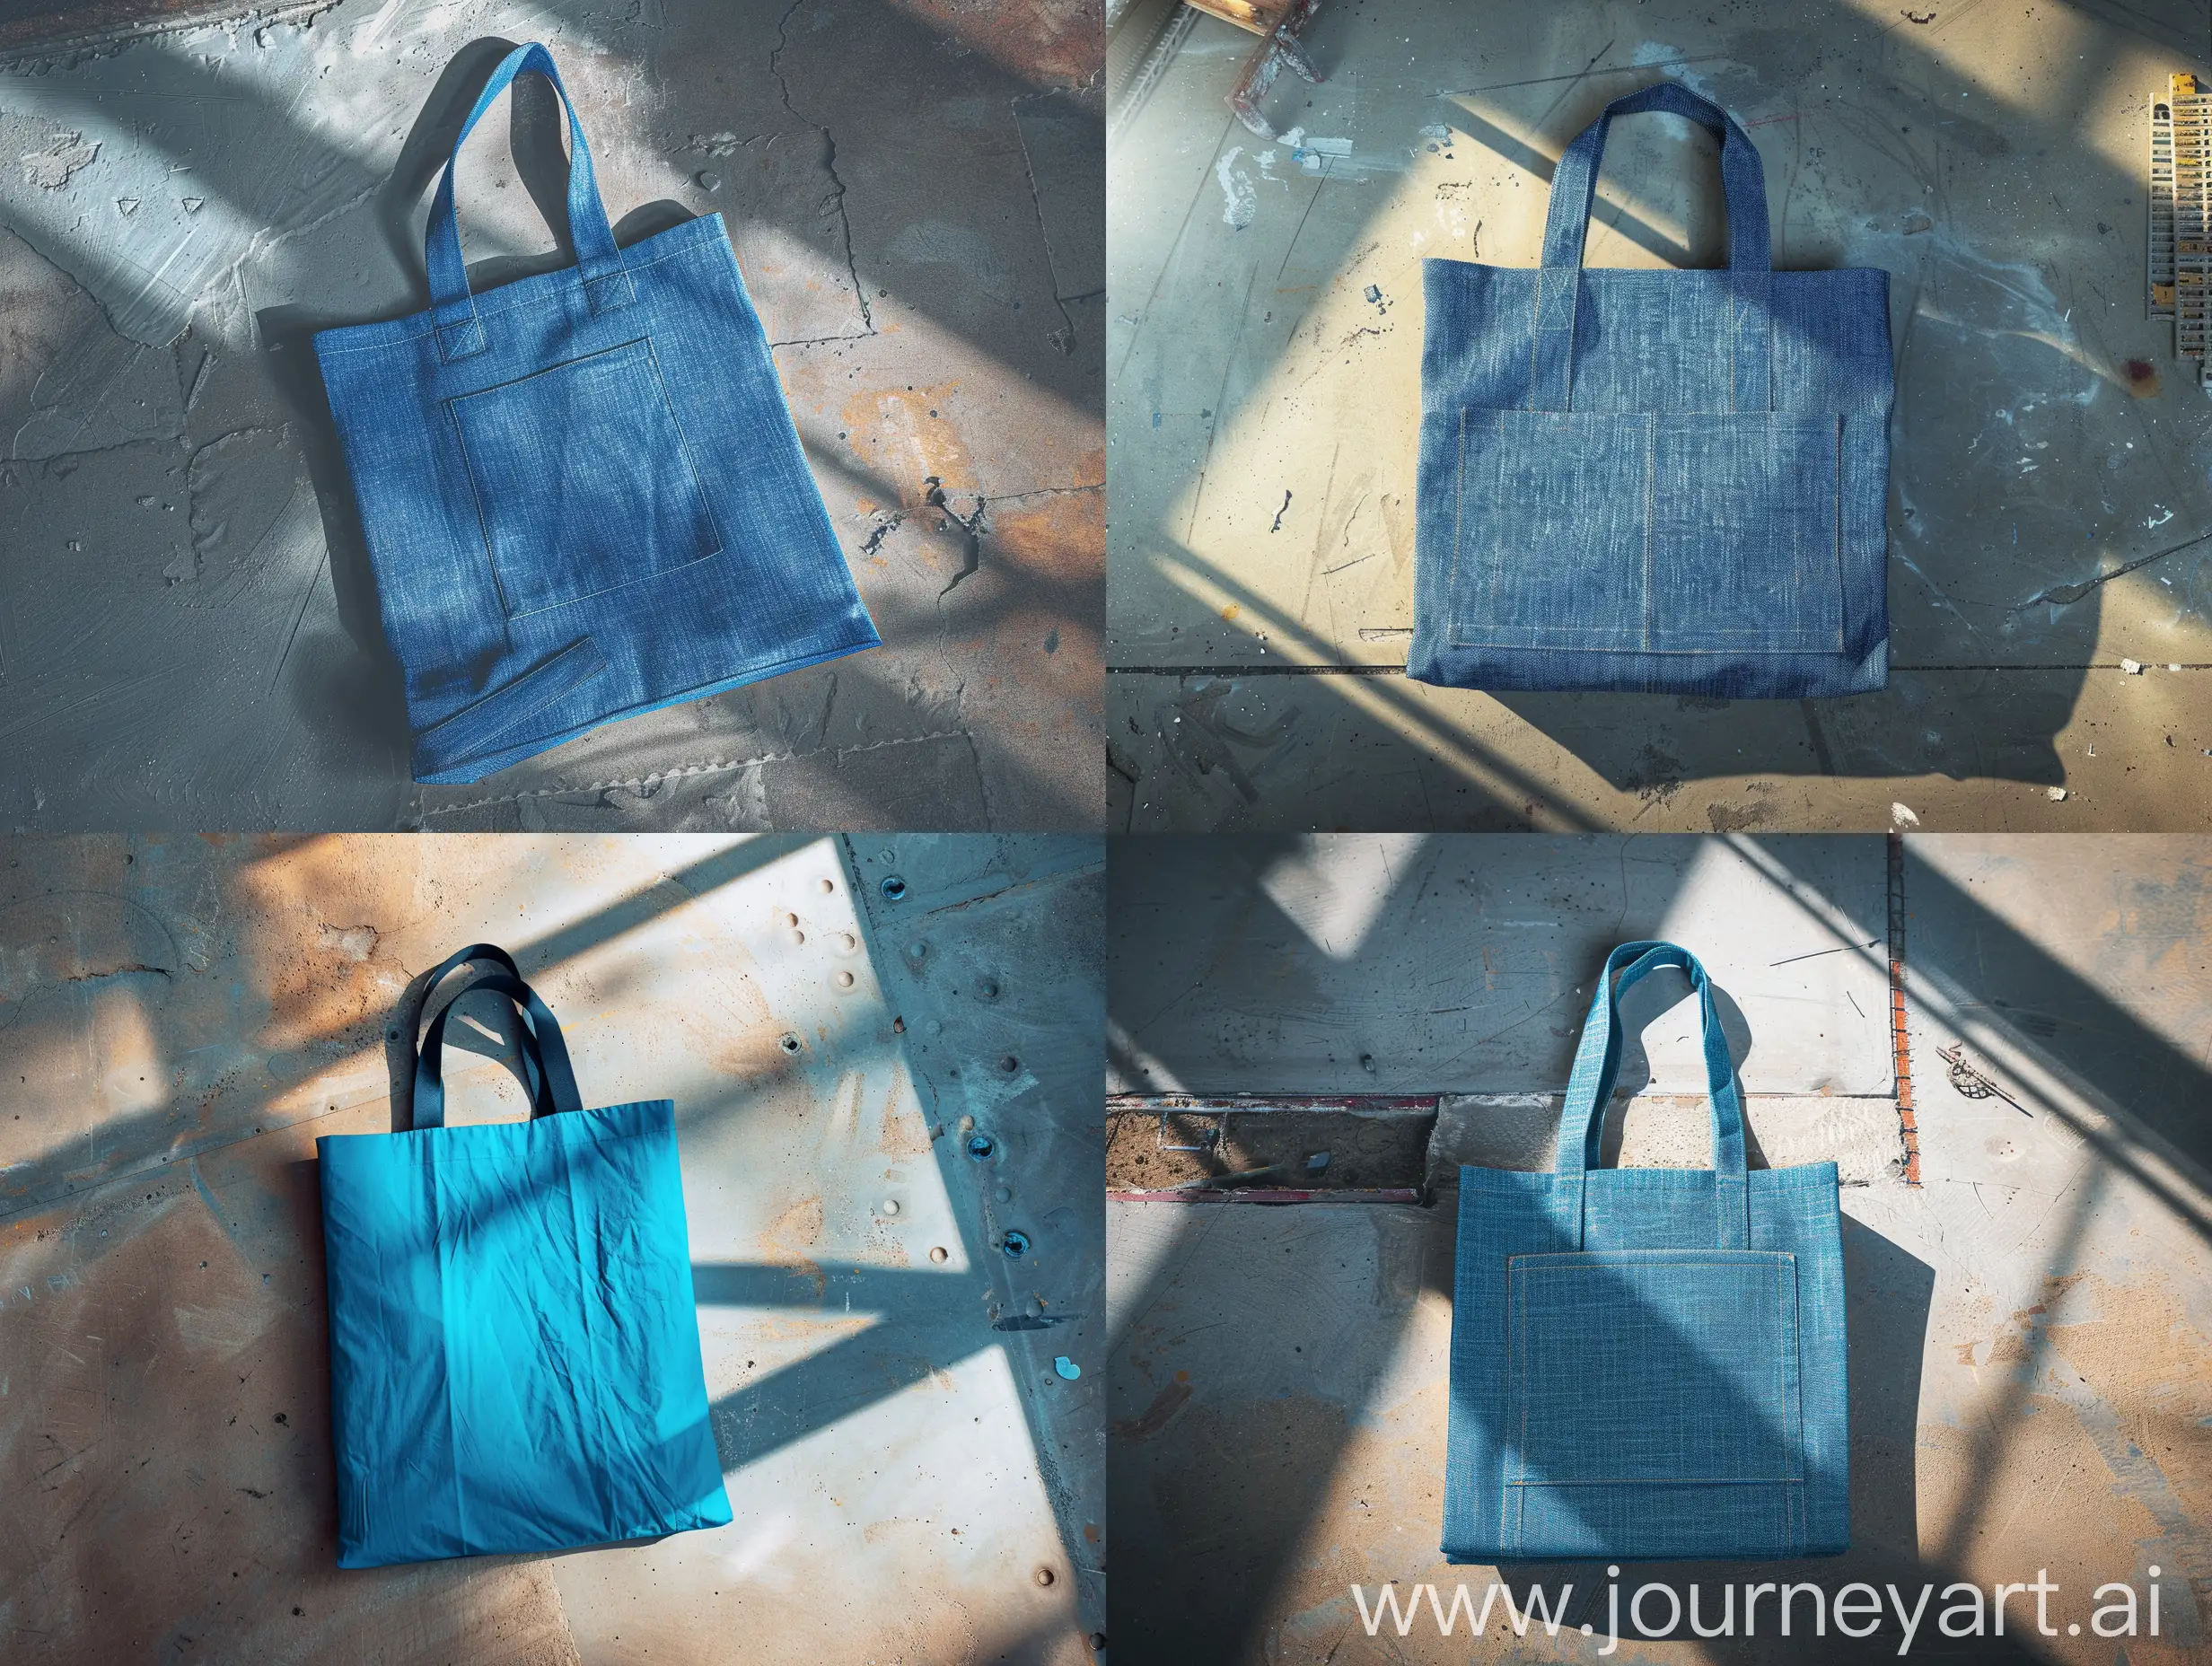 HighQuality-Blue-Tote-Bag-on-Concrete-Floor-Top-View-in-Sunlight